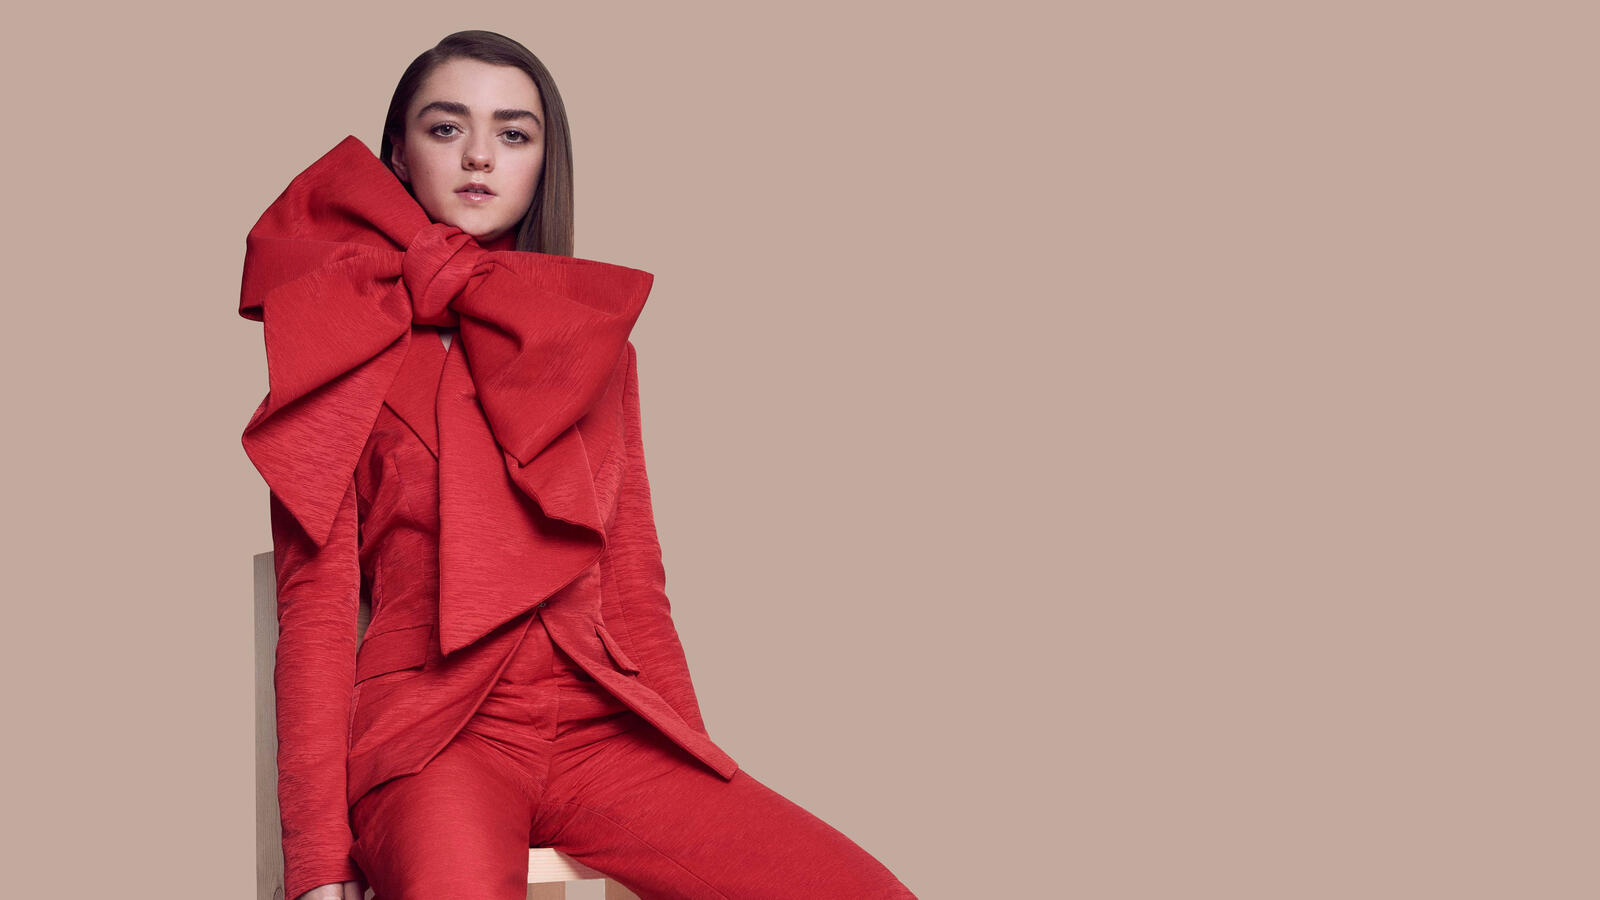 Wallpapers maisie williams celebrity girls on the desktop